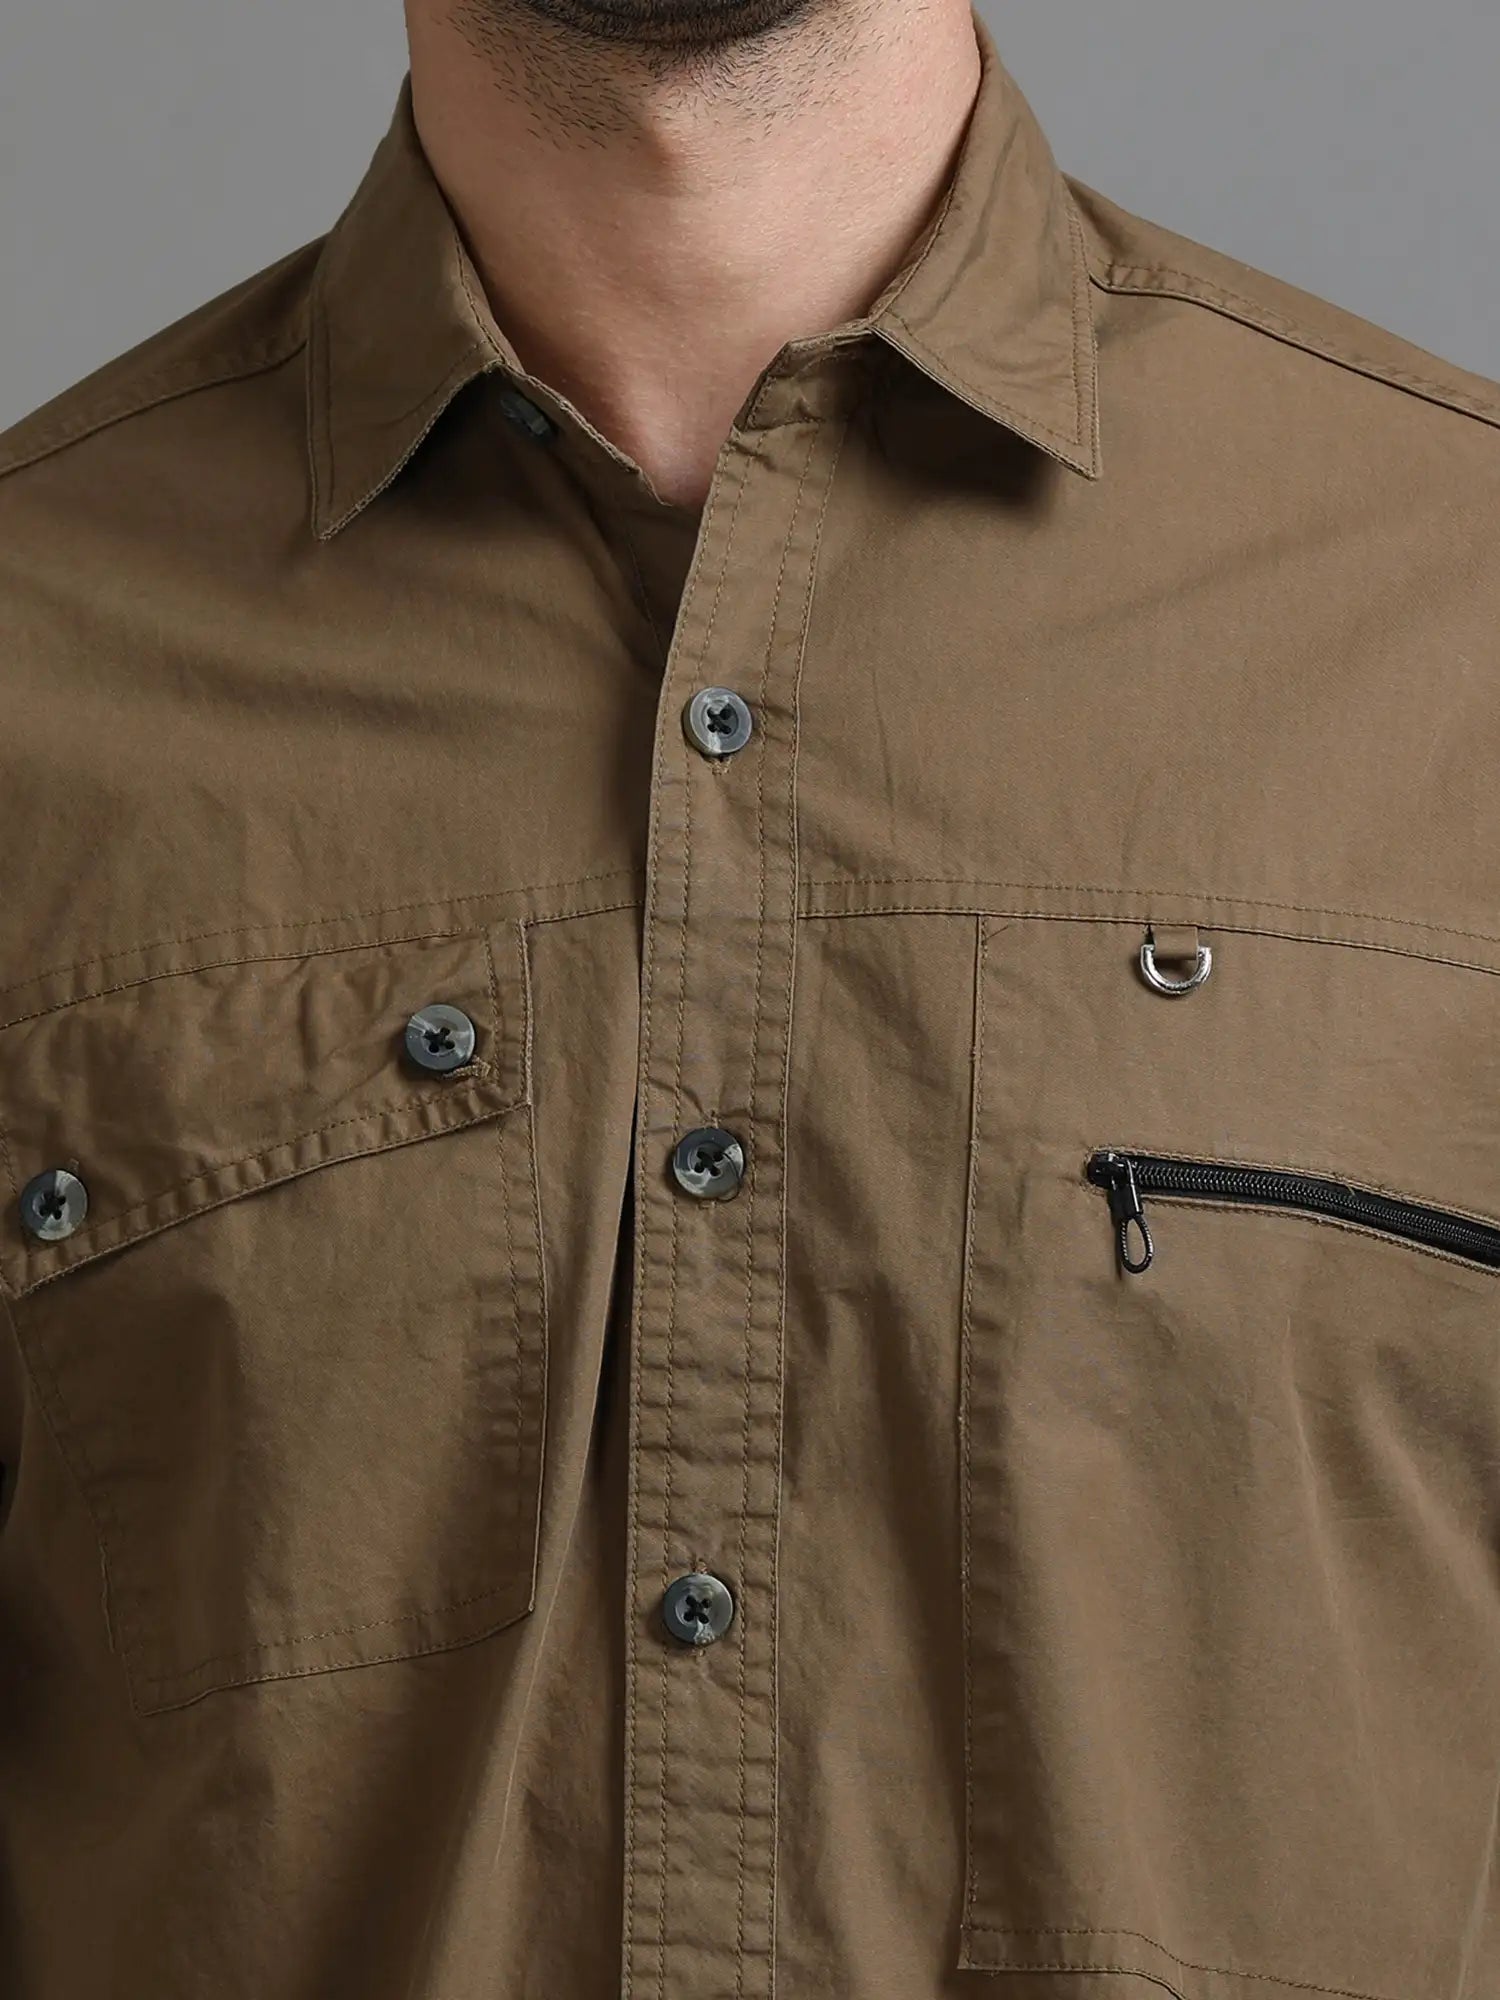 Warm and Rich Cocoa Solid Shirt for Men